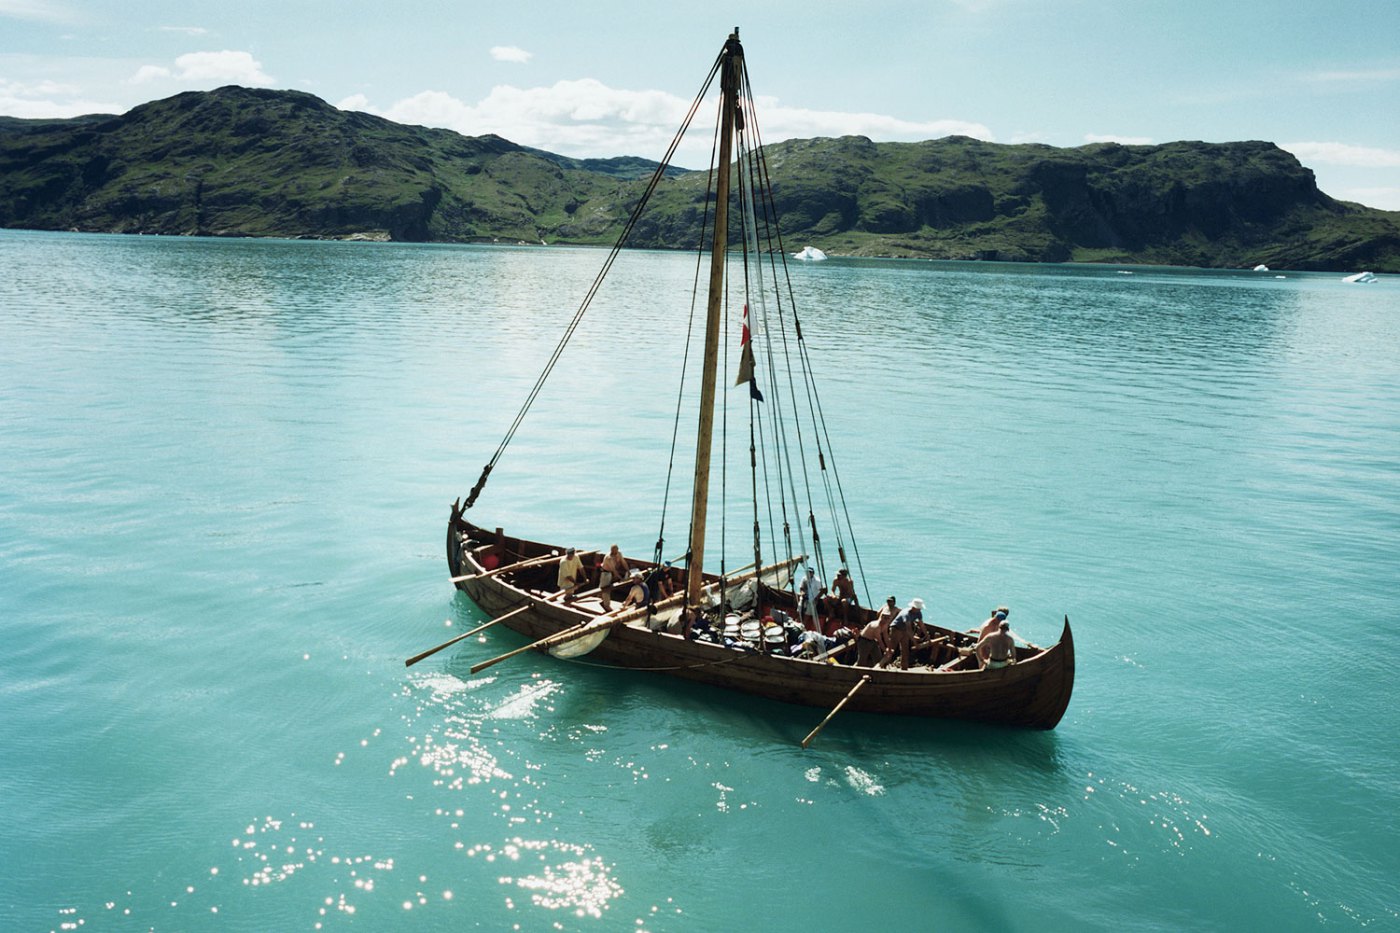 Replica of a Viking ship by Greenland.